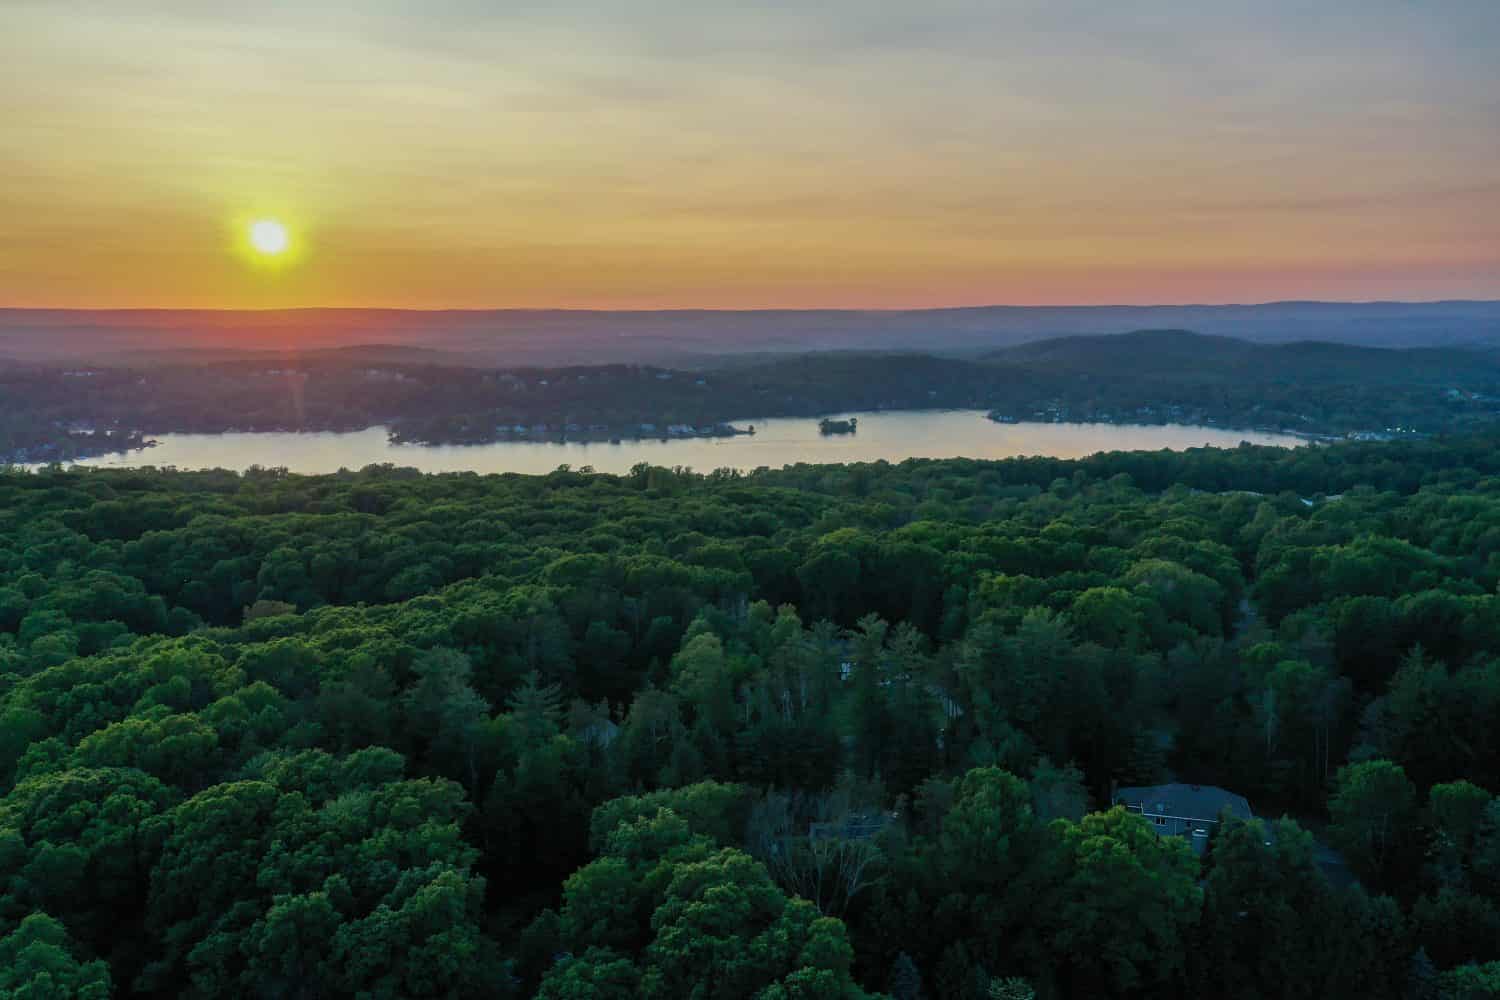 Beautiful sunset over lush forests and Lake Mohawk in Sparta NJ in the distance in late spring aerial